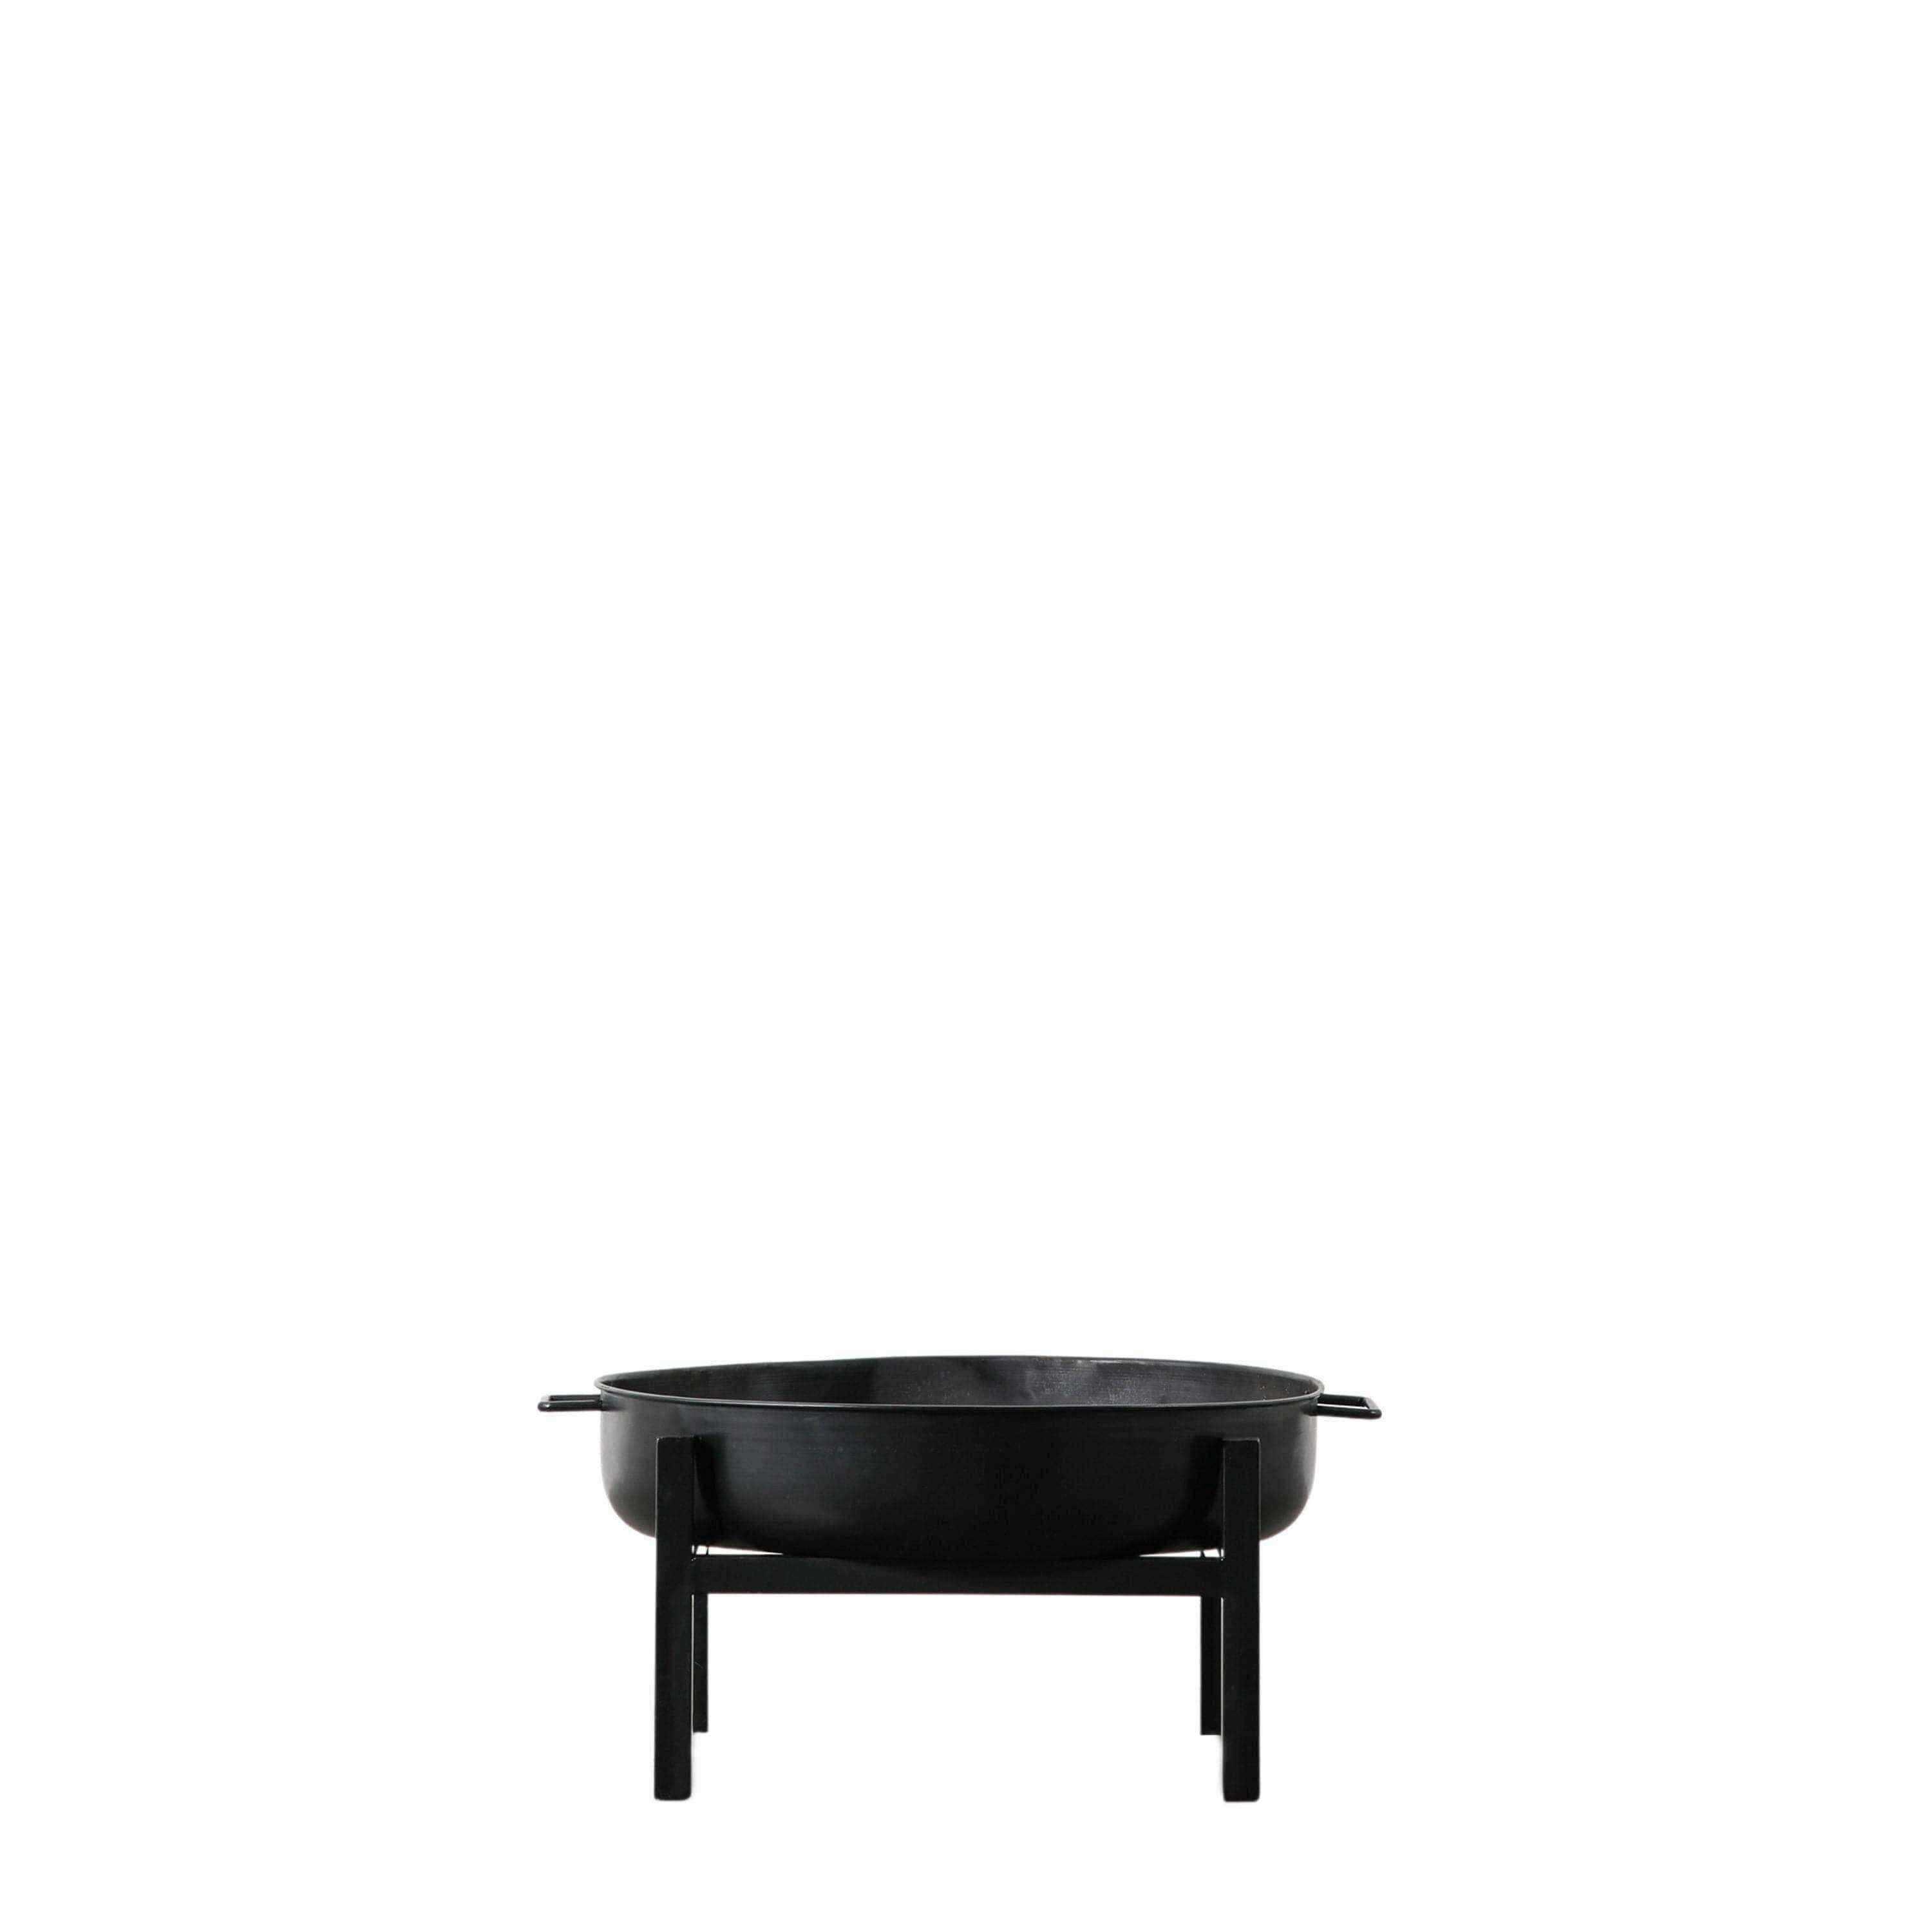 Contemporary Style Round Iron Fire Pit - The Farthing